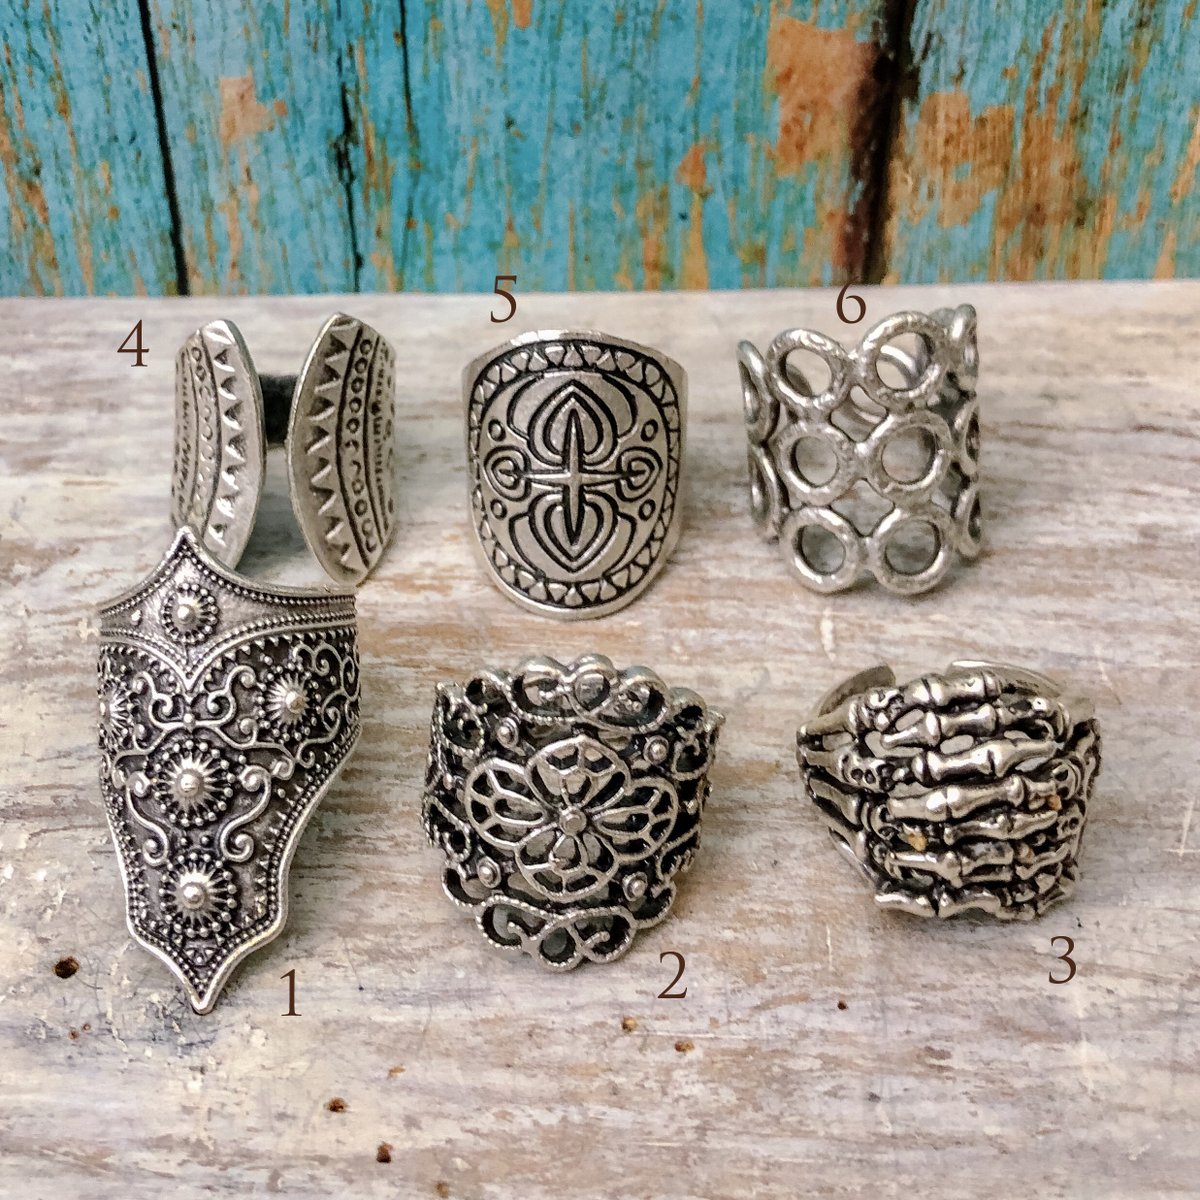 Excited to share the latest addition to my #etsy shop: Adjustable Antique Silver Plated Bohemian Boho Ethnic Tribal Ring etsy.me/324PlKe #jewelry #ring #women #brass #bohemianrings #bohemianring #ethnicring #bohorings #gypsyrings